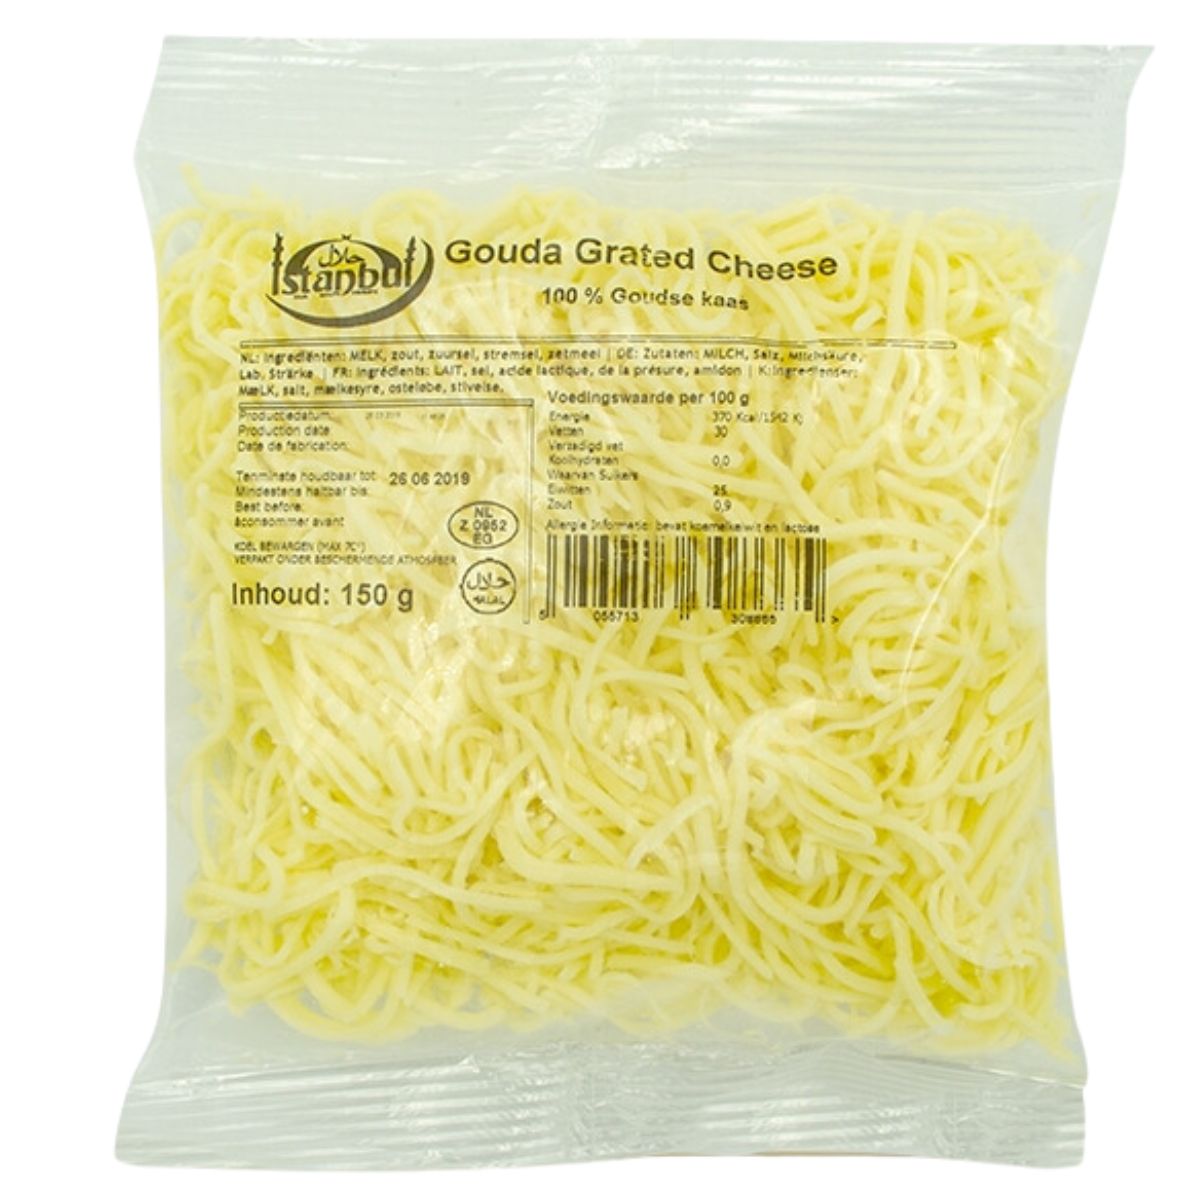 Istanbul - Gouda Grated Cheese - 150g on a white background.